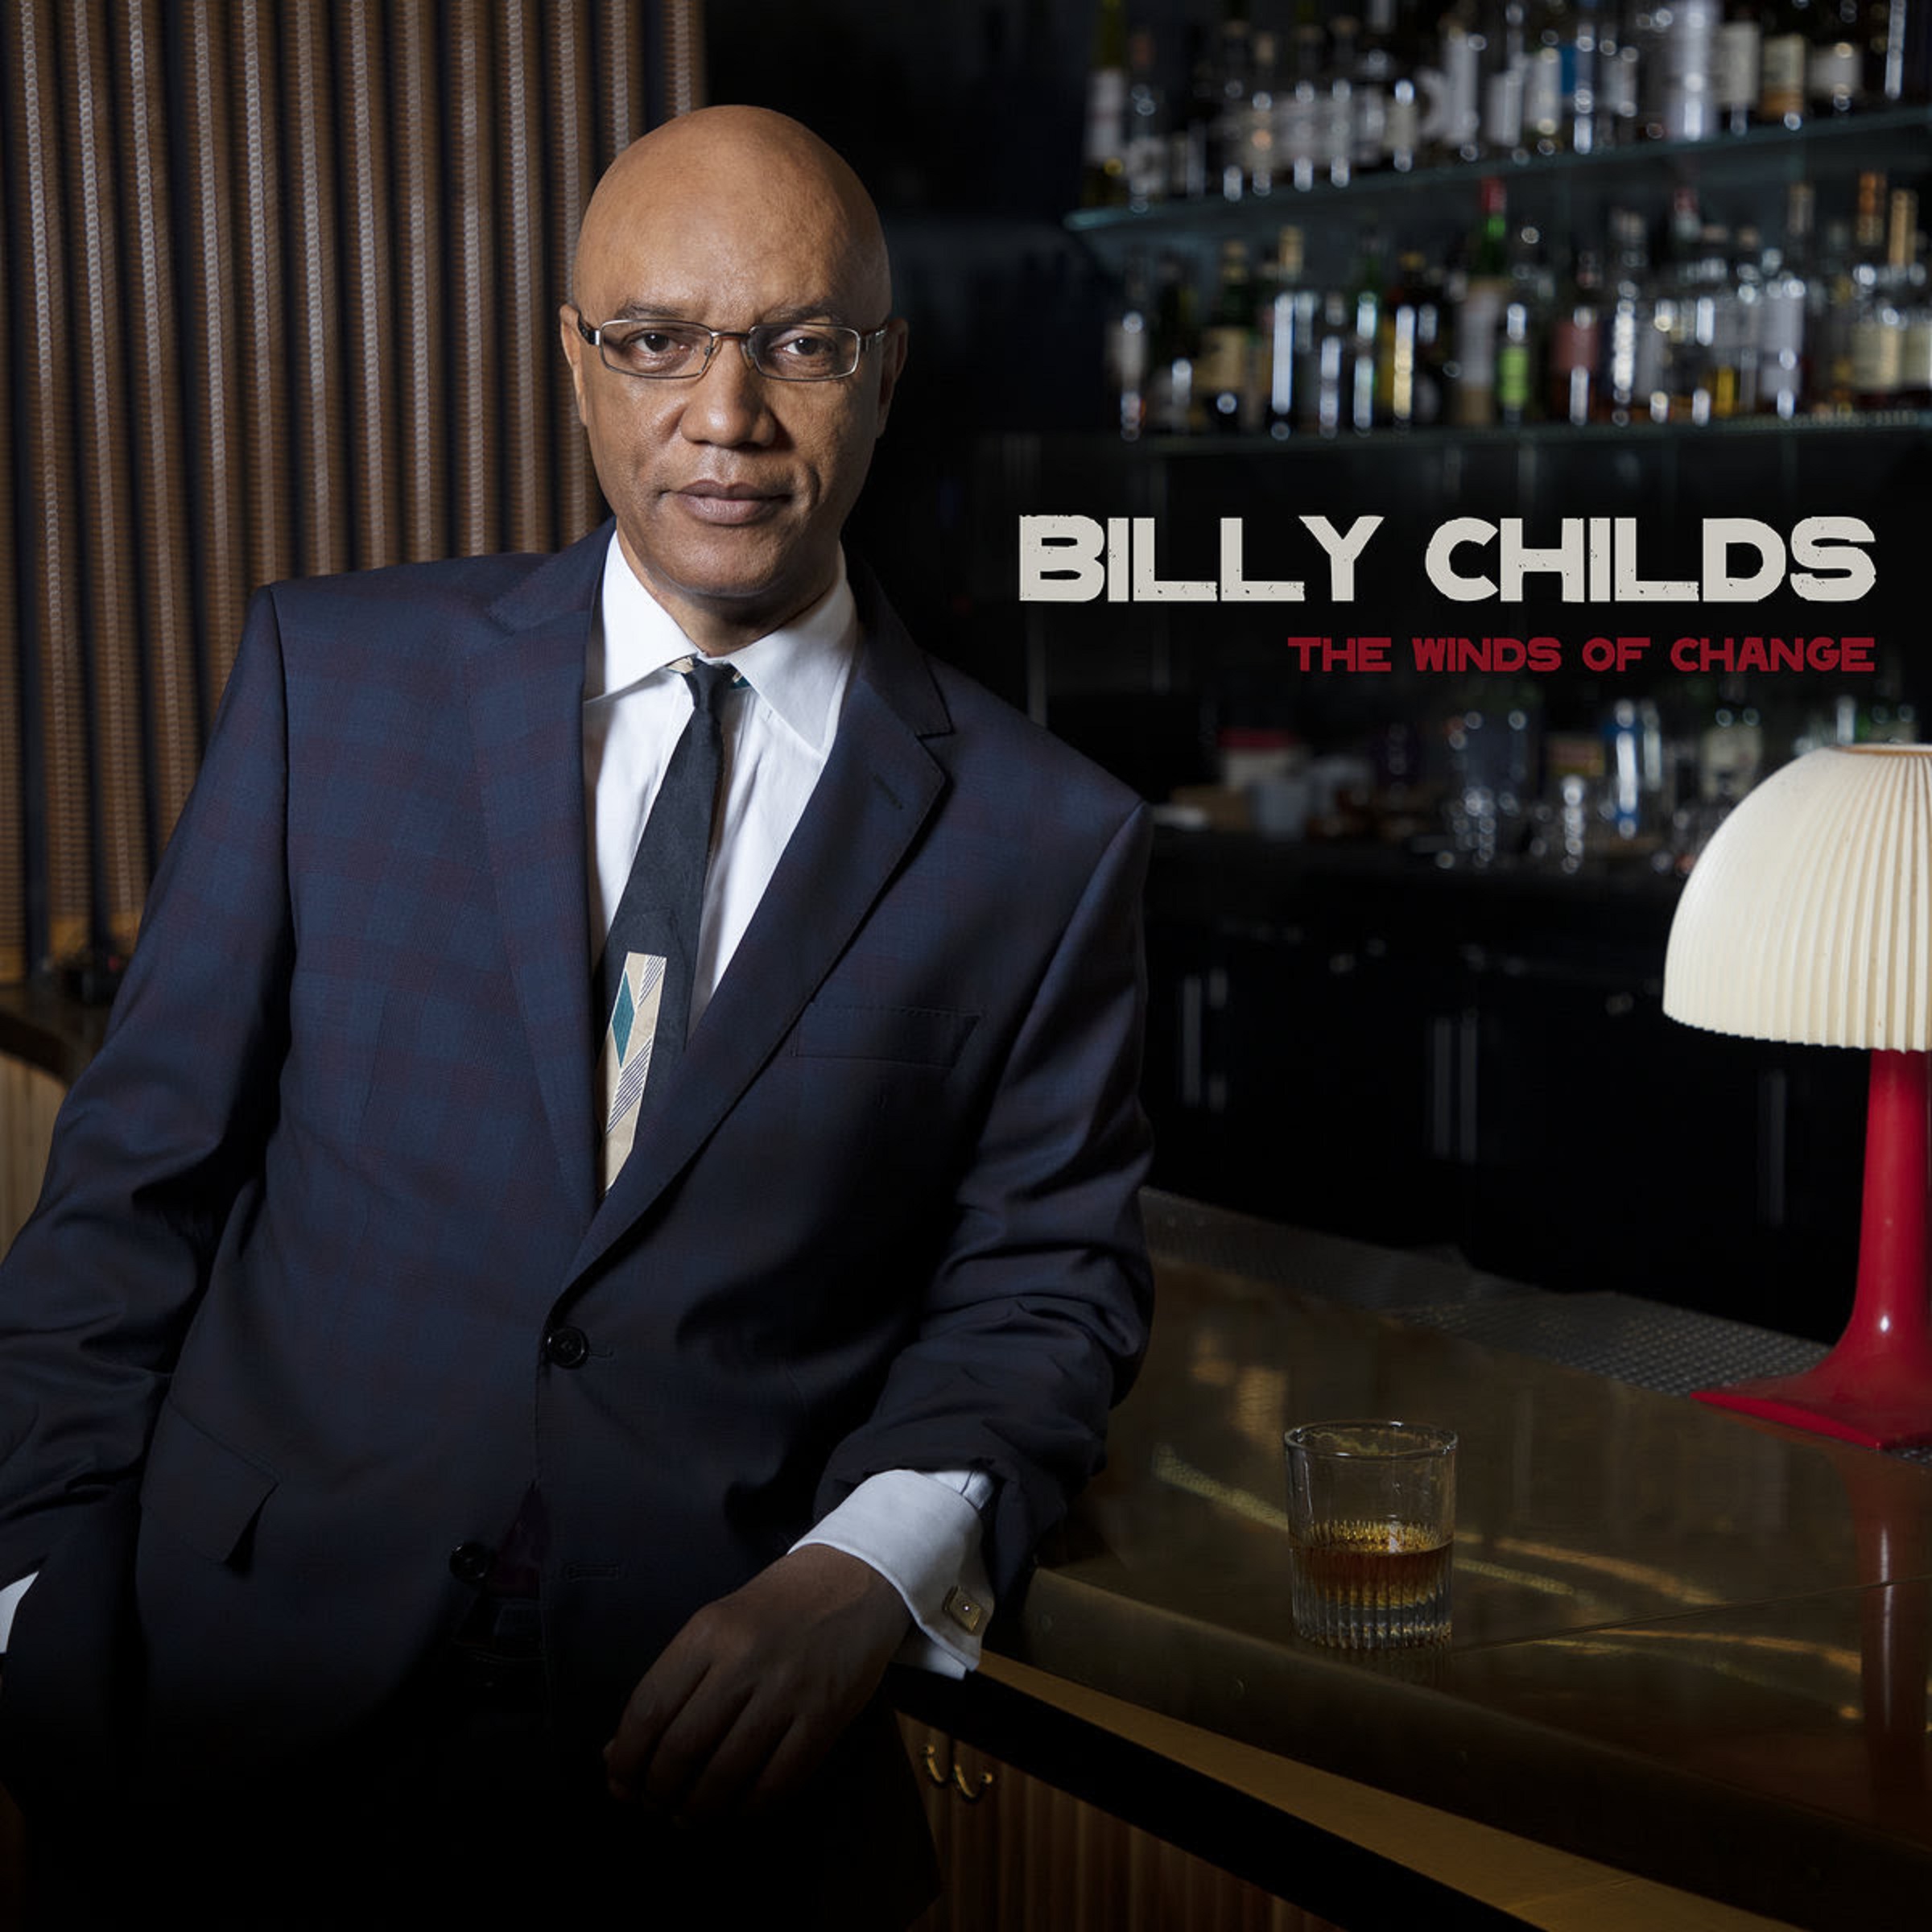 Grammy® Nominated Billy Childs' "The Winds of Change" - A Journey into the Heart of Jazz